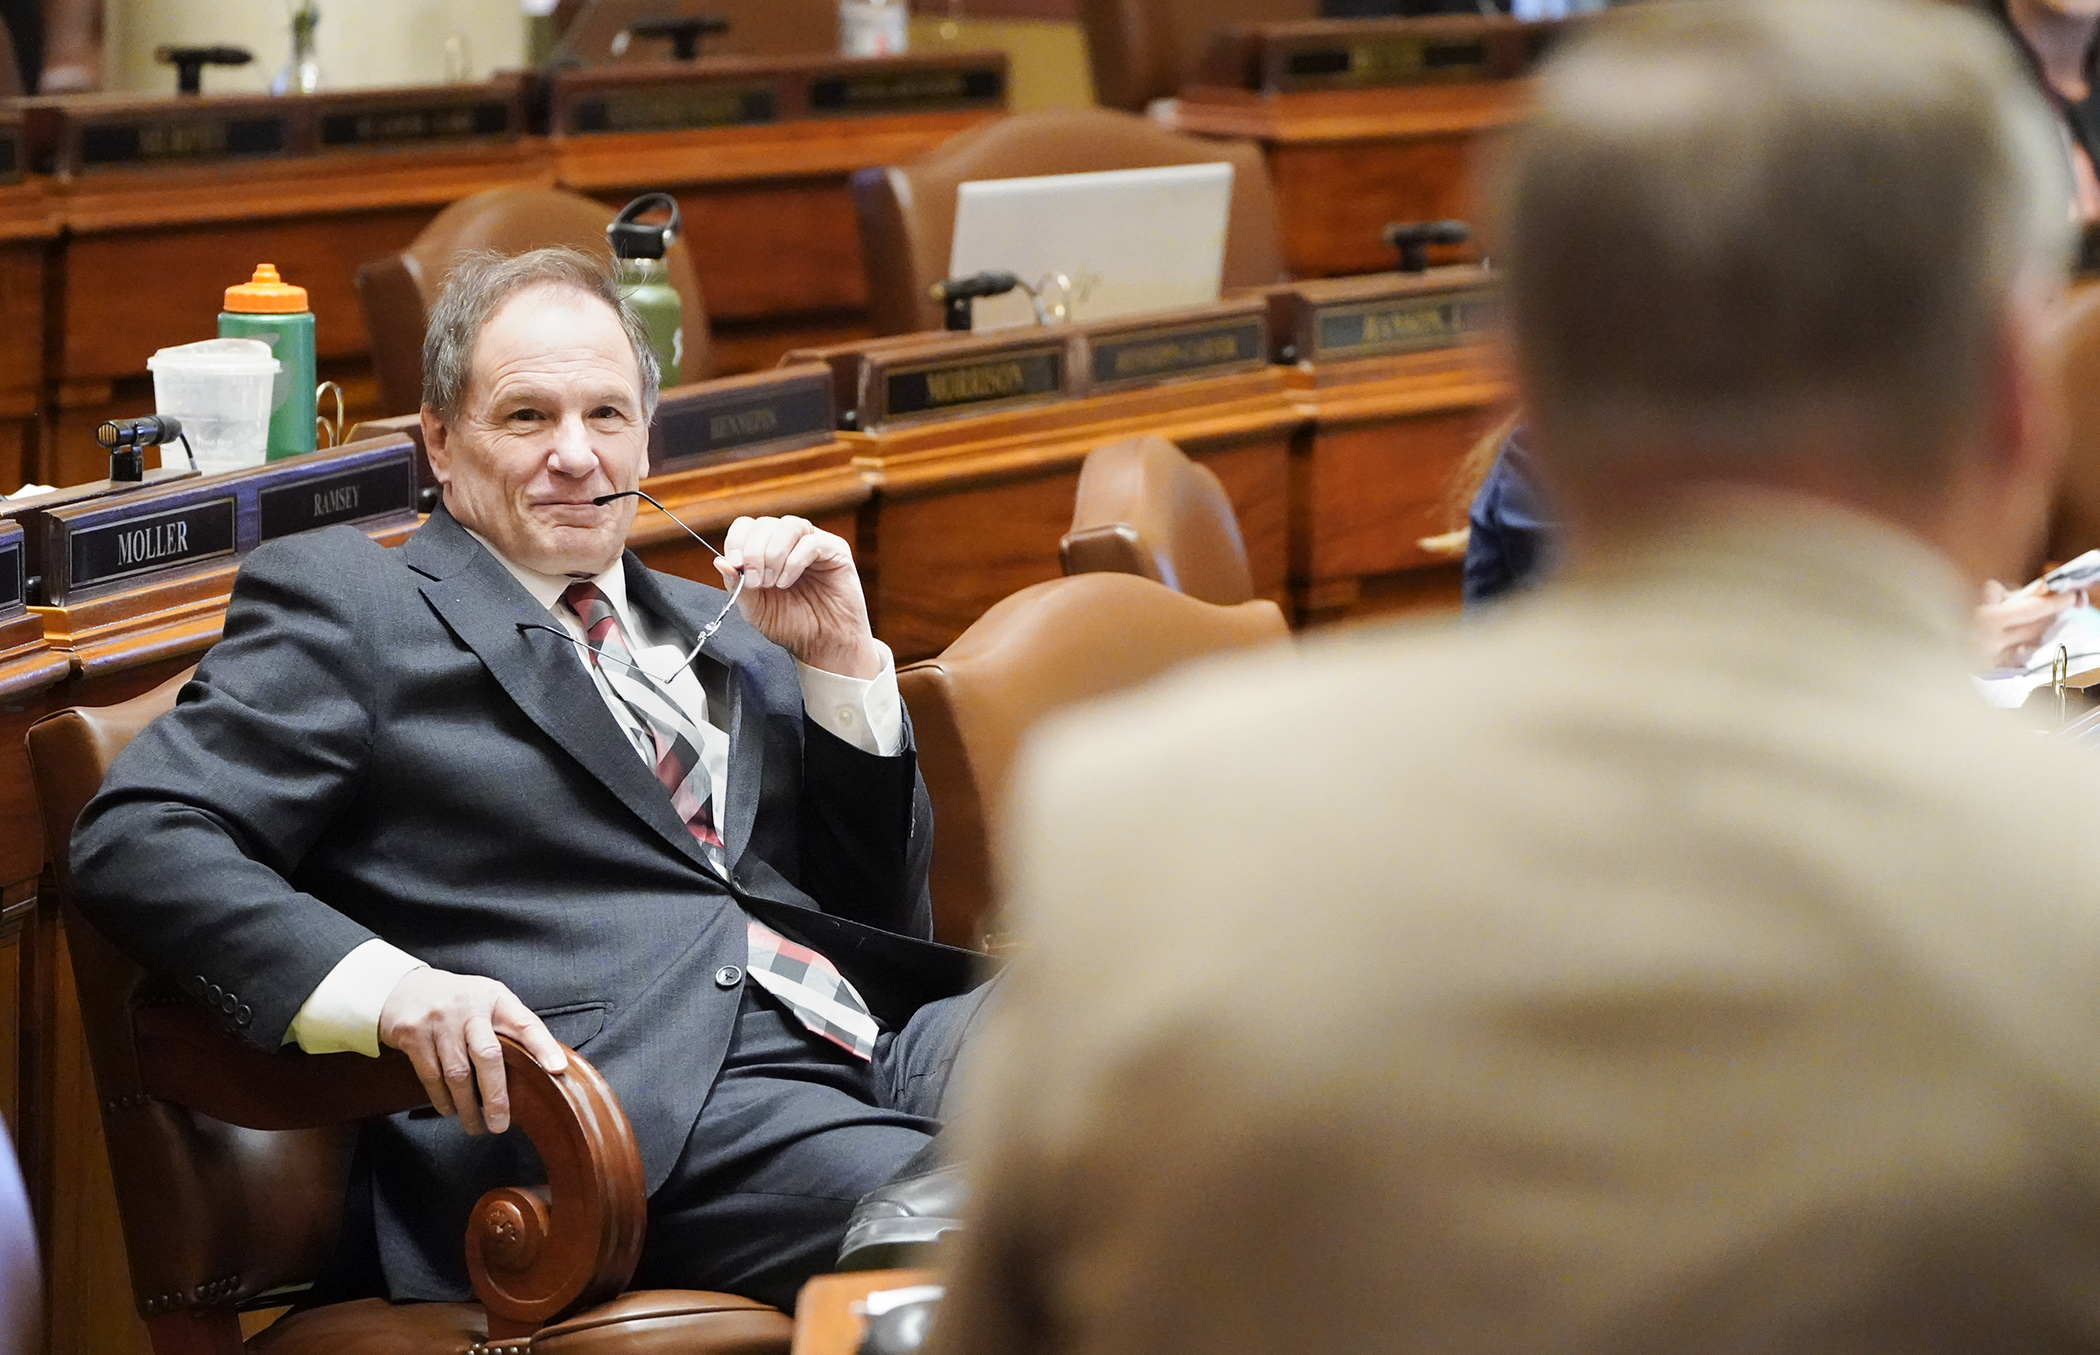 Rep. Paul Marquart, left, chair of the House Taxes Committee, listens as Rep. Glenn Gruenhagen comments during May 4 debate on the omnibus tax bill. (Photo by Paul Battaglia)